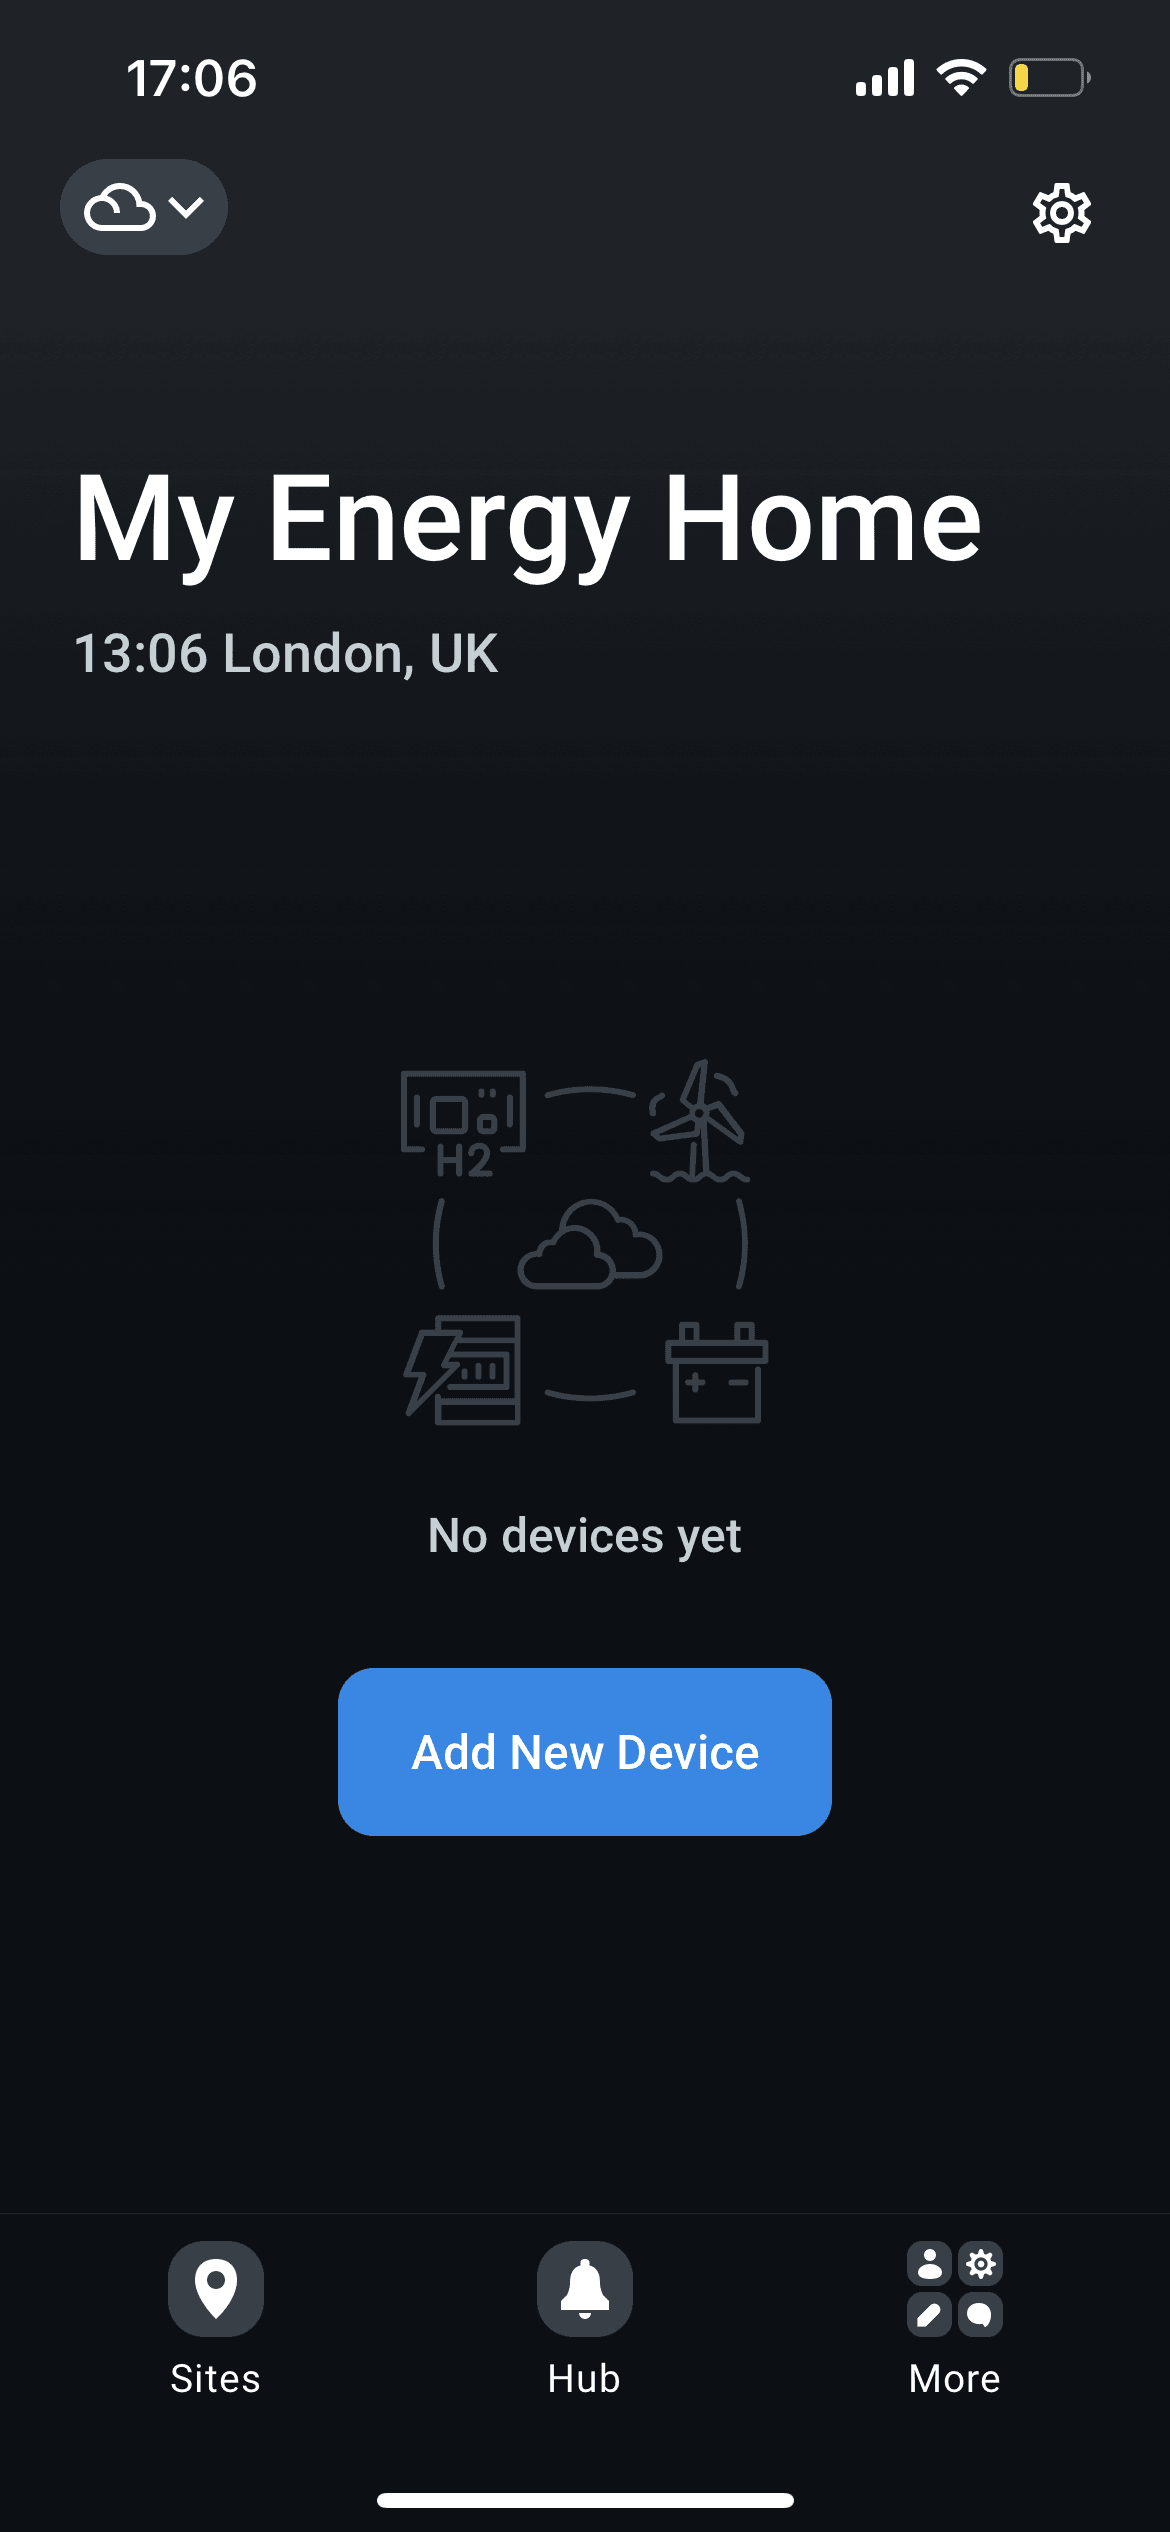 Your site is ready for adding new devices.